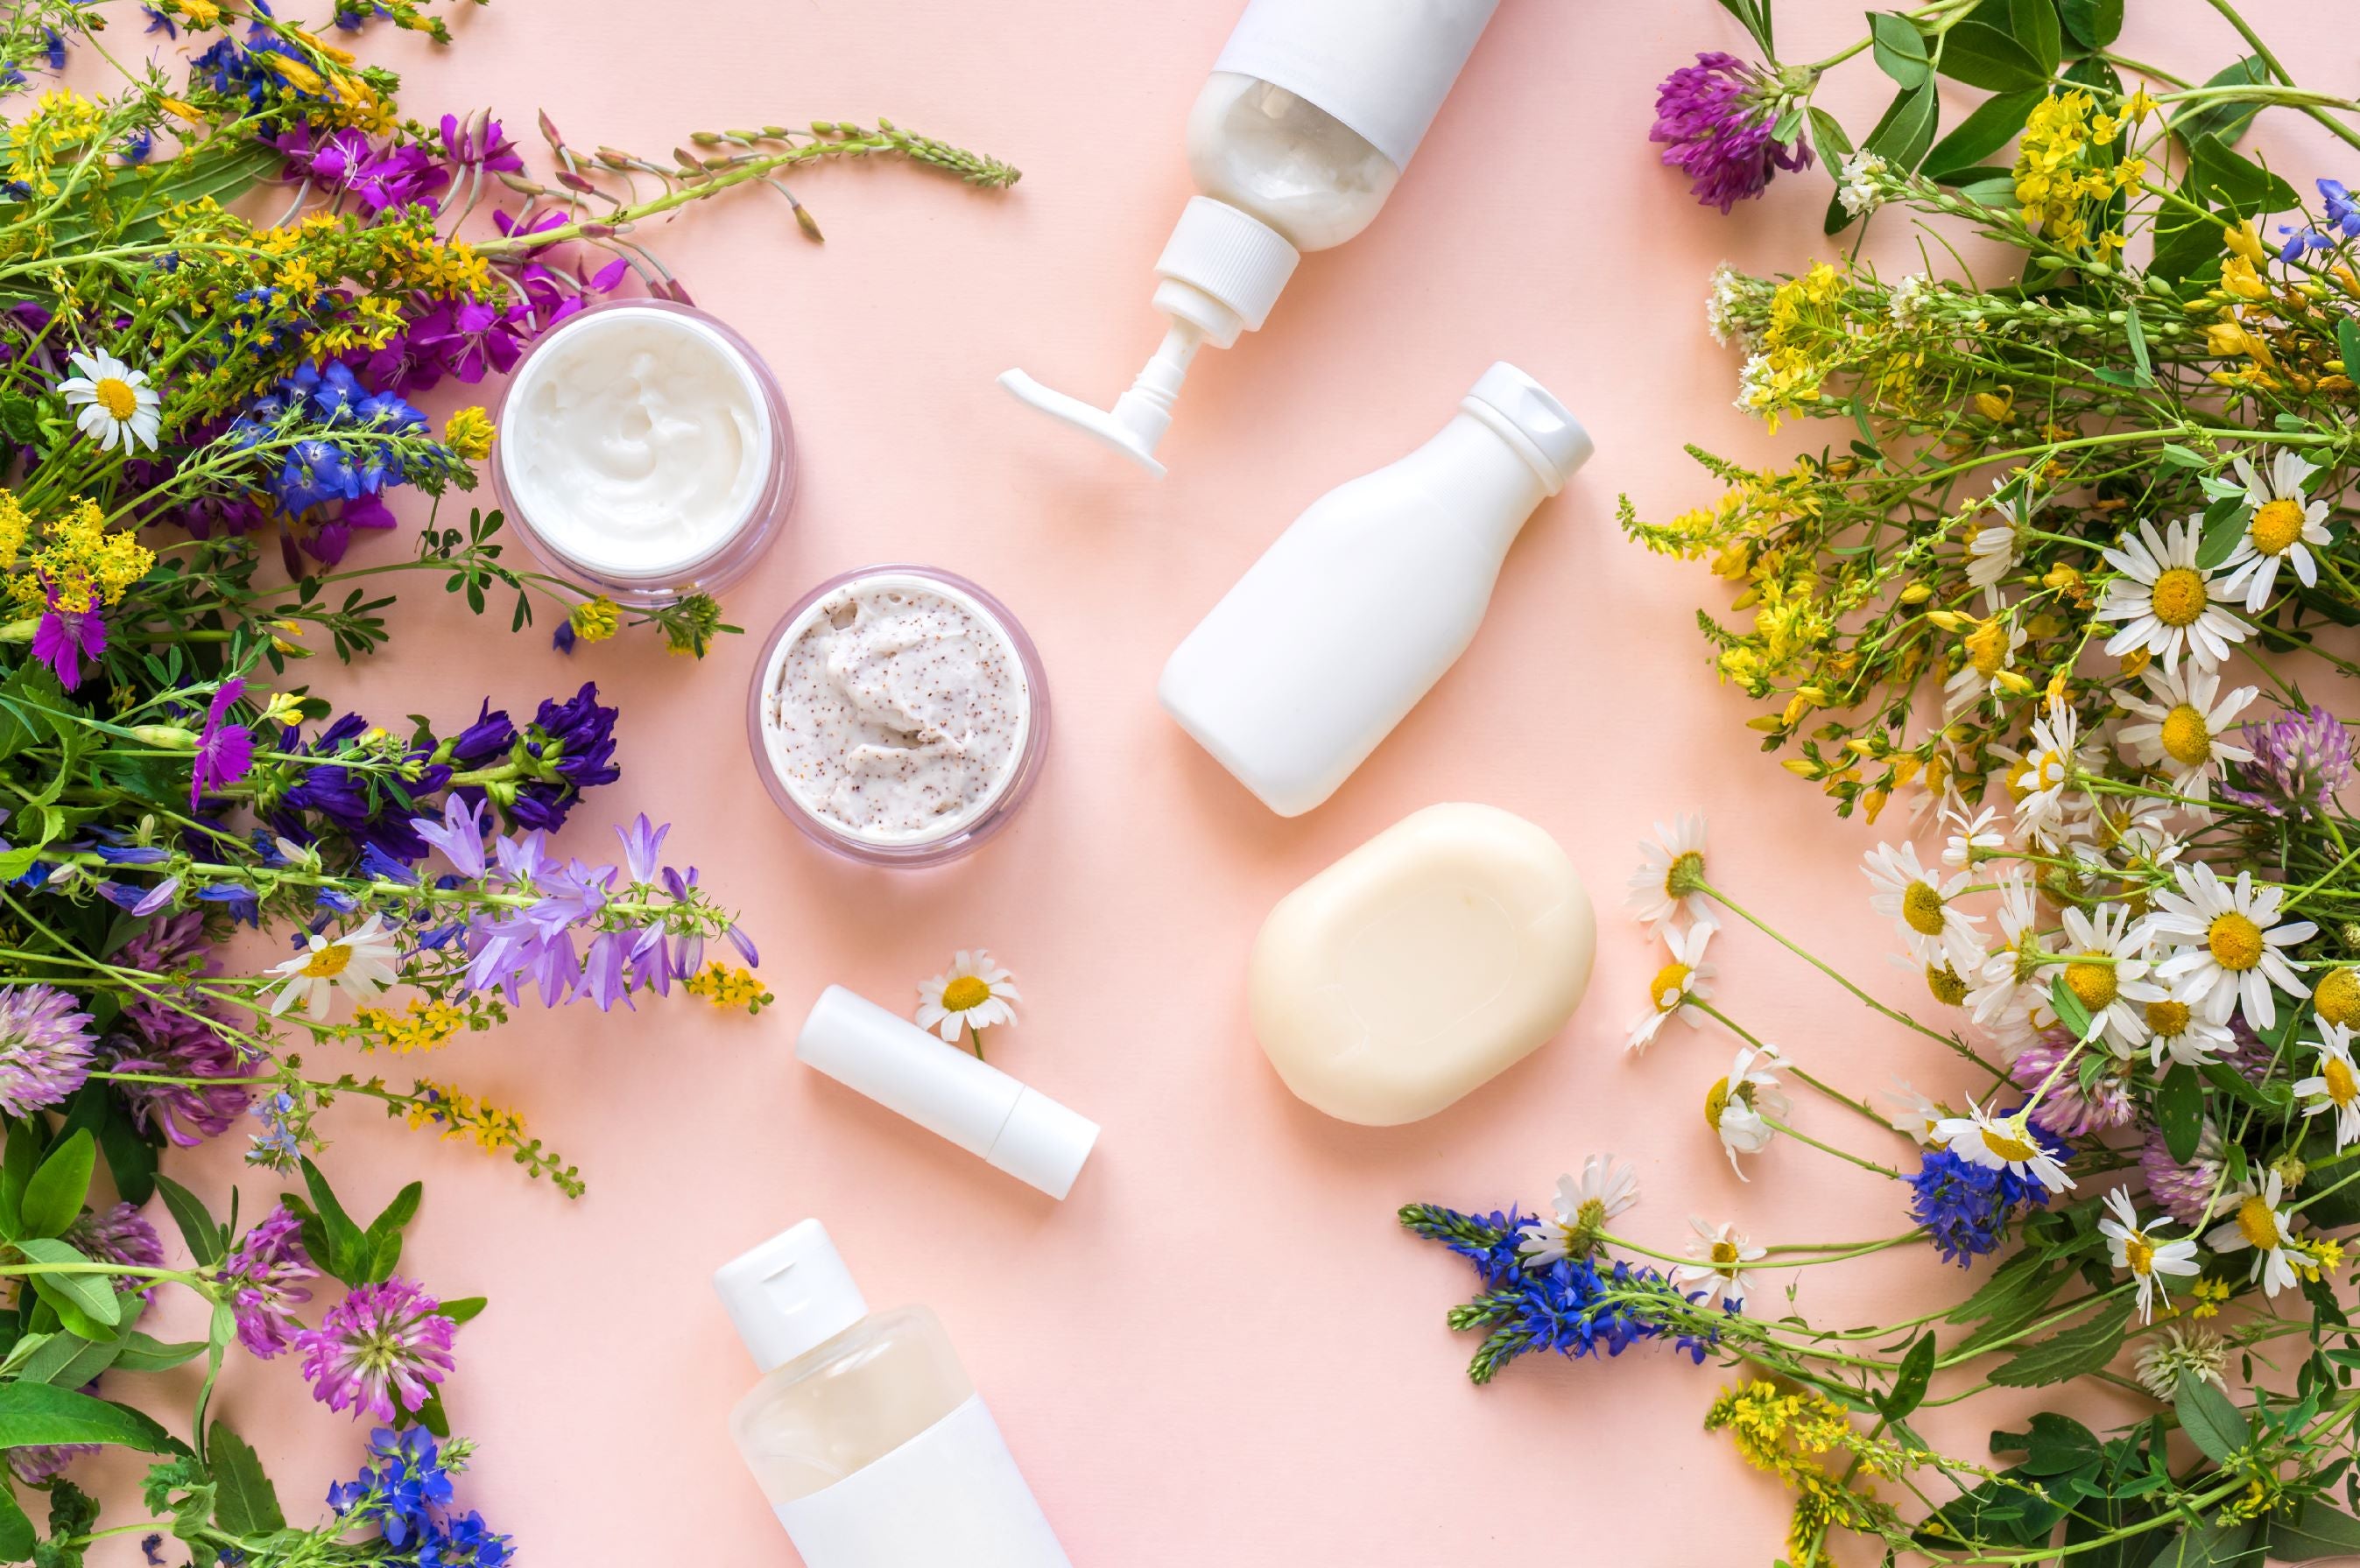 White bottles, a bar of soap and jars of lotion are displayed on a pink background with wildflowers.